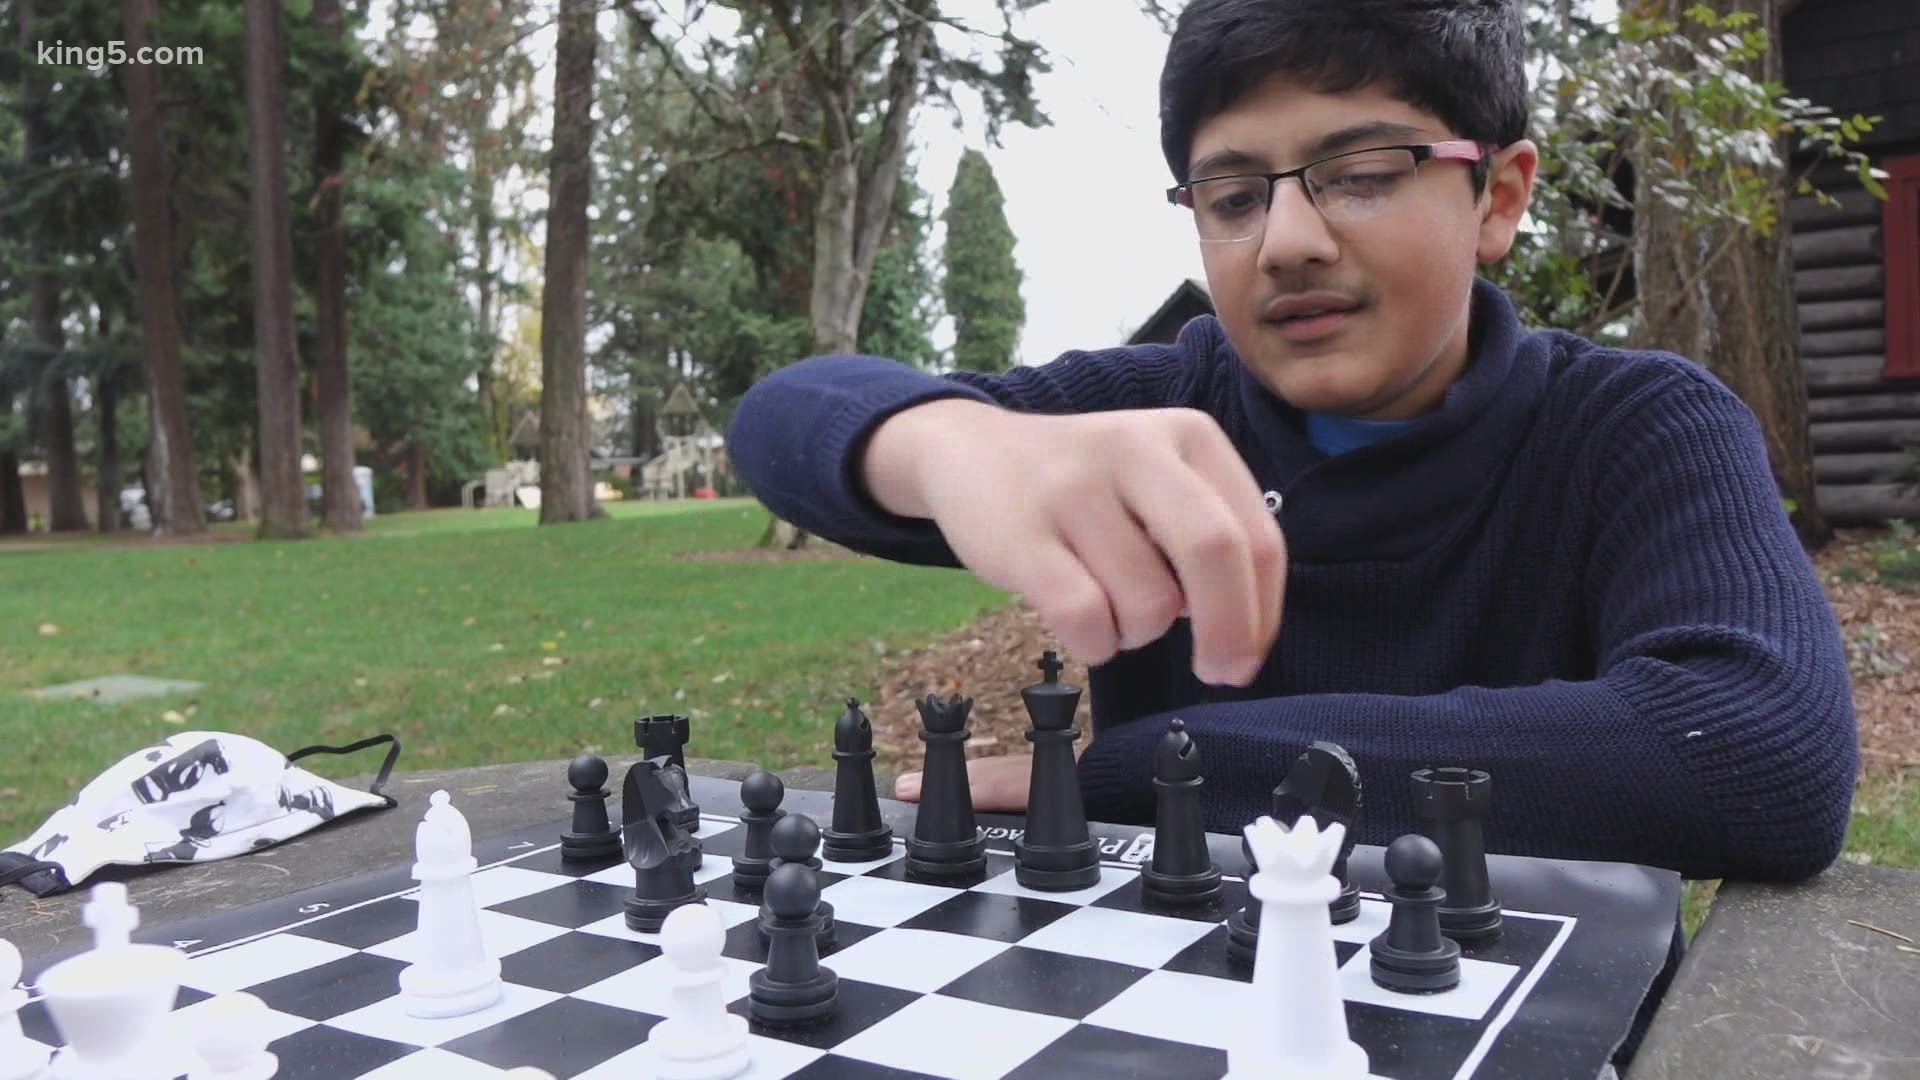 The Washington State Chess Team won the first State Chess Cup after competing against 30 teams over the past few months - and all of it was done virtually.